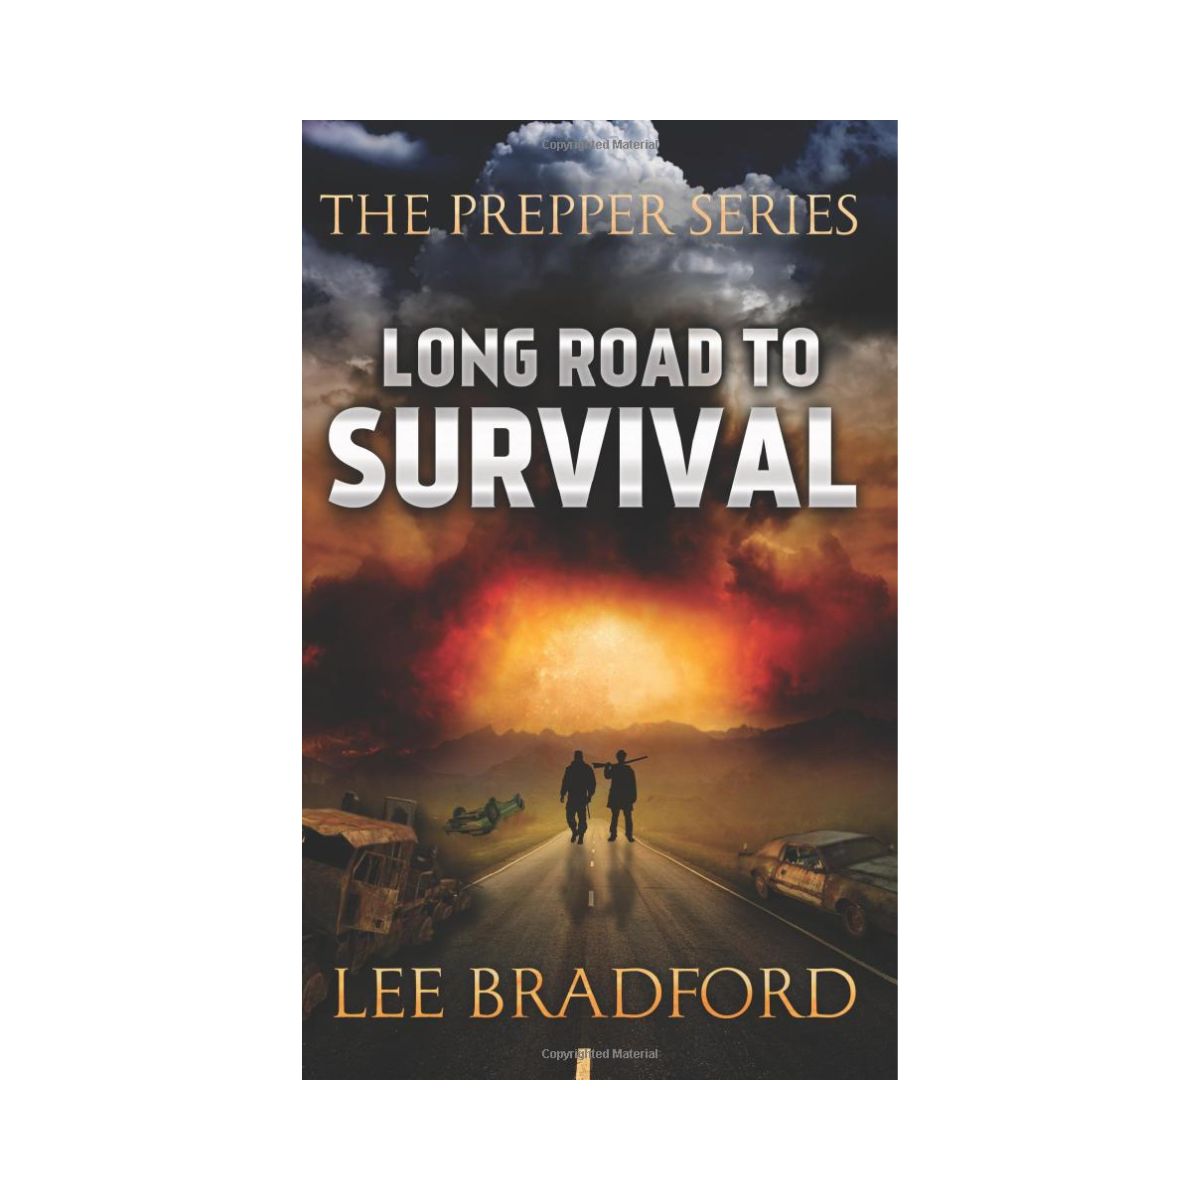 The Long Road to Survival by Lee Bradford